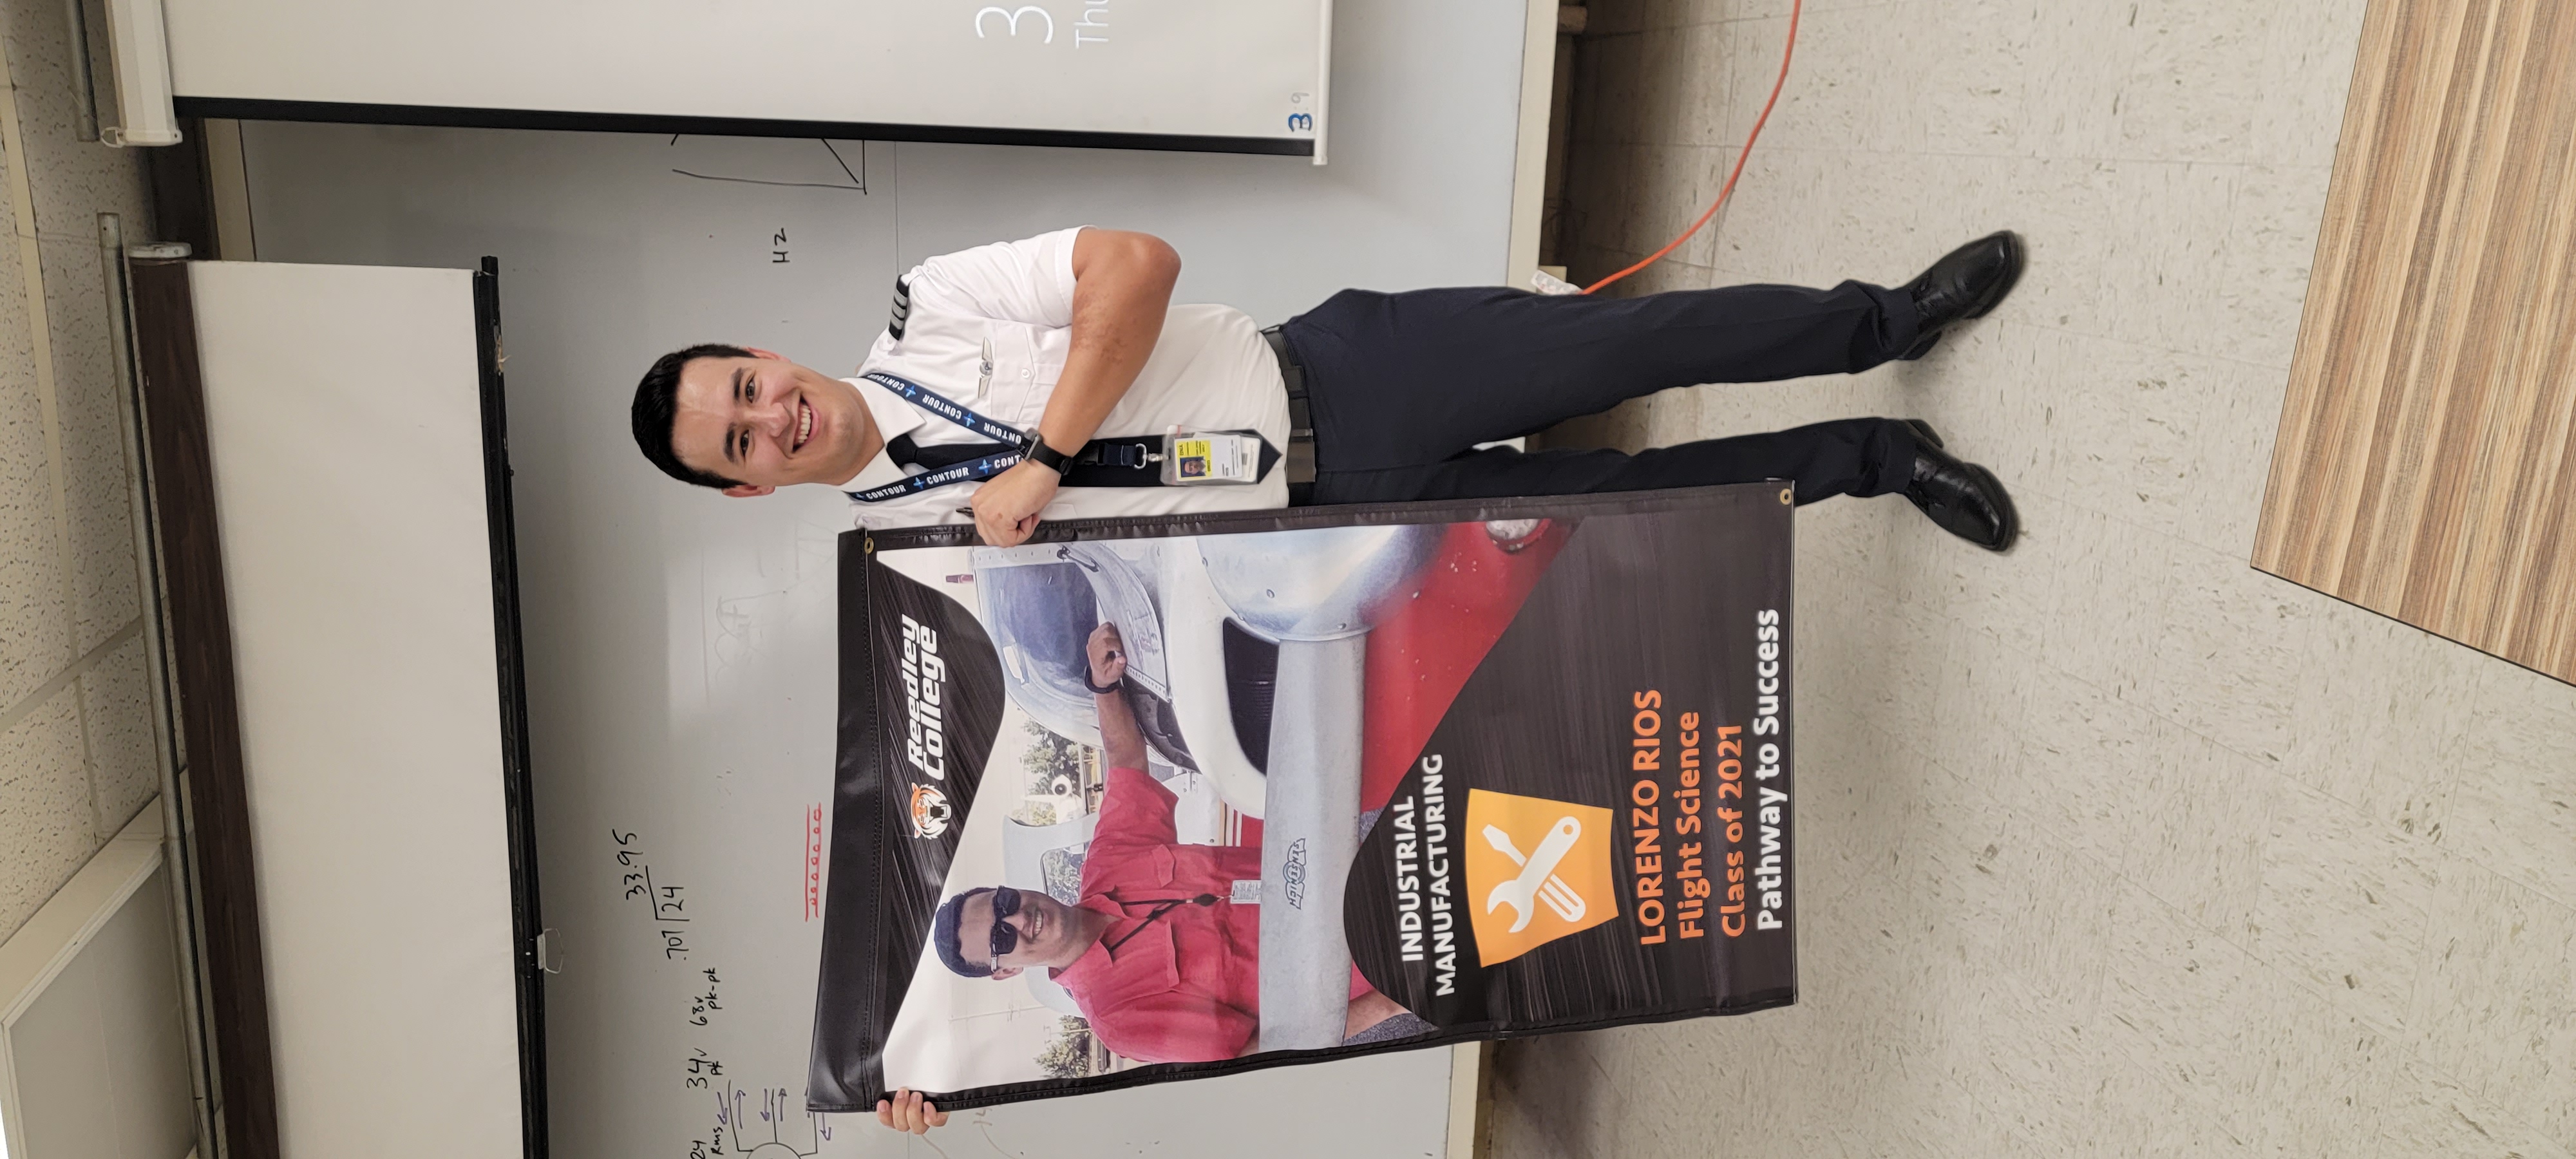 Lorenzo Rios with his student pathway banner